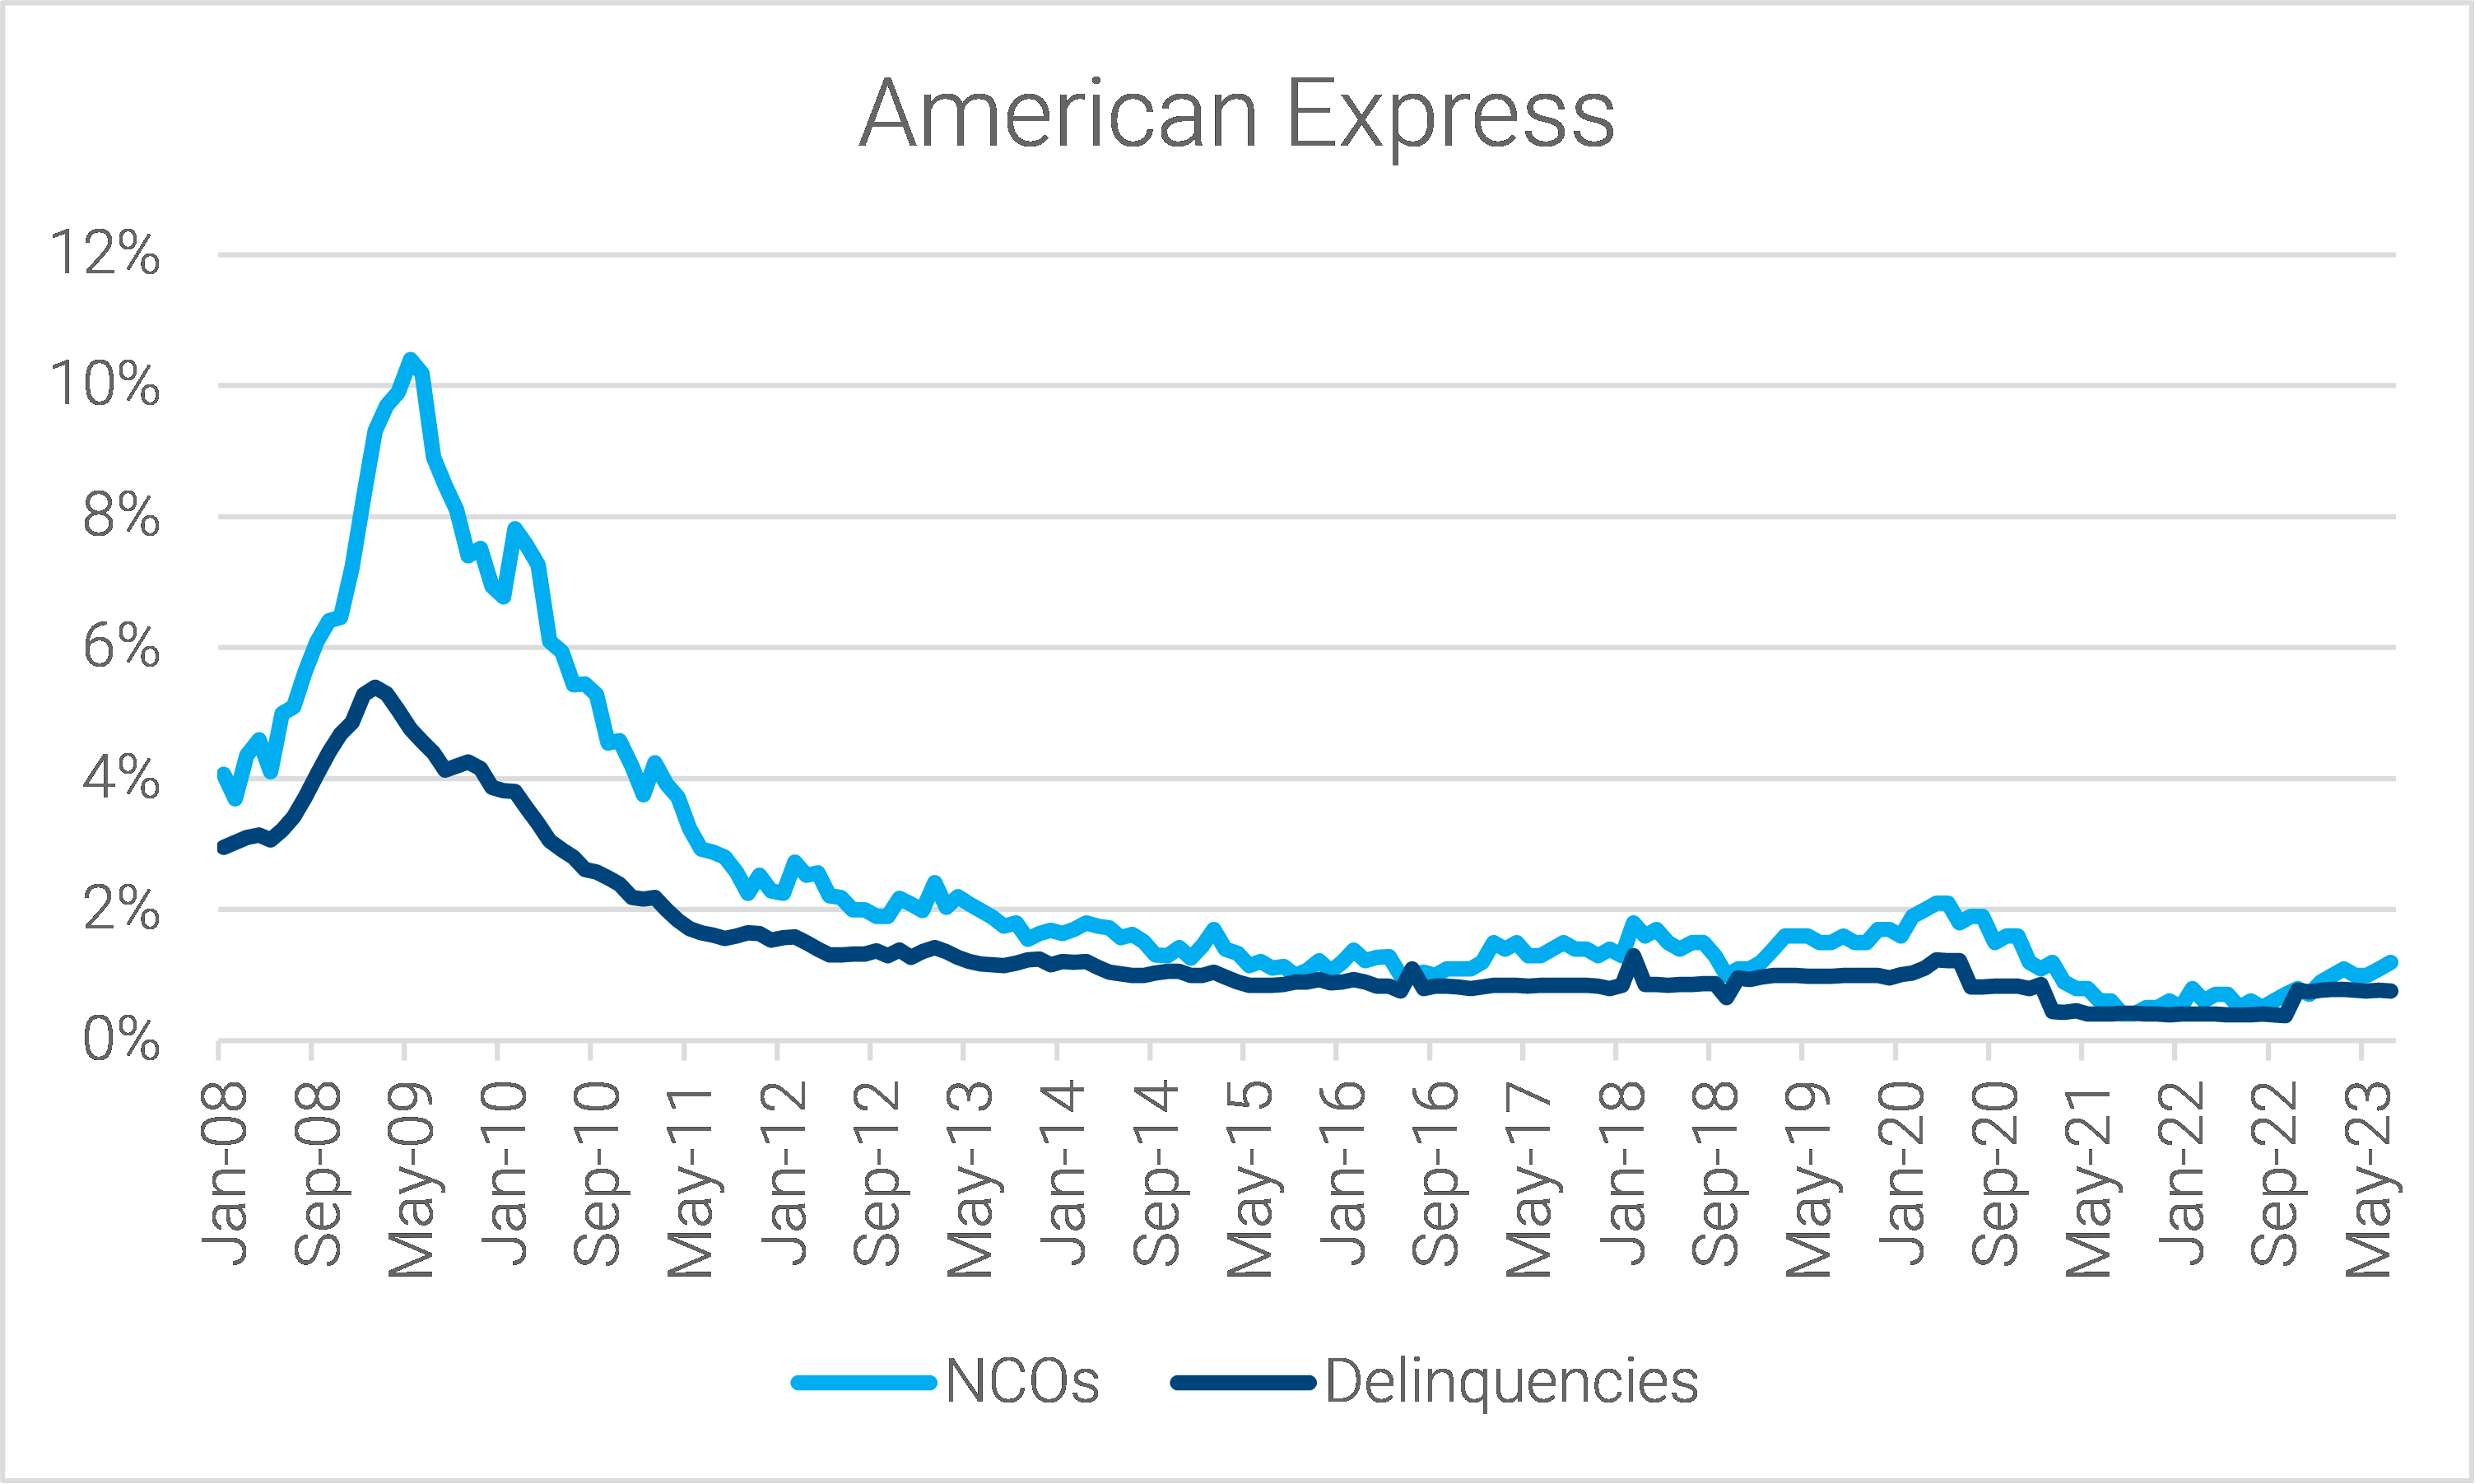 03-american-express-master-trust-net-charge-off-and-delinquency-rates